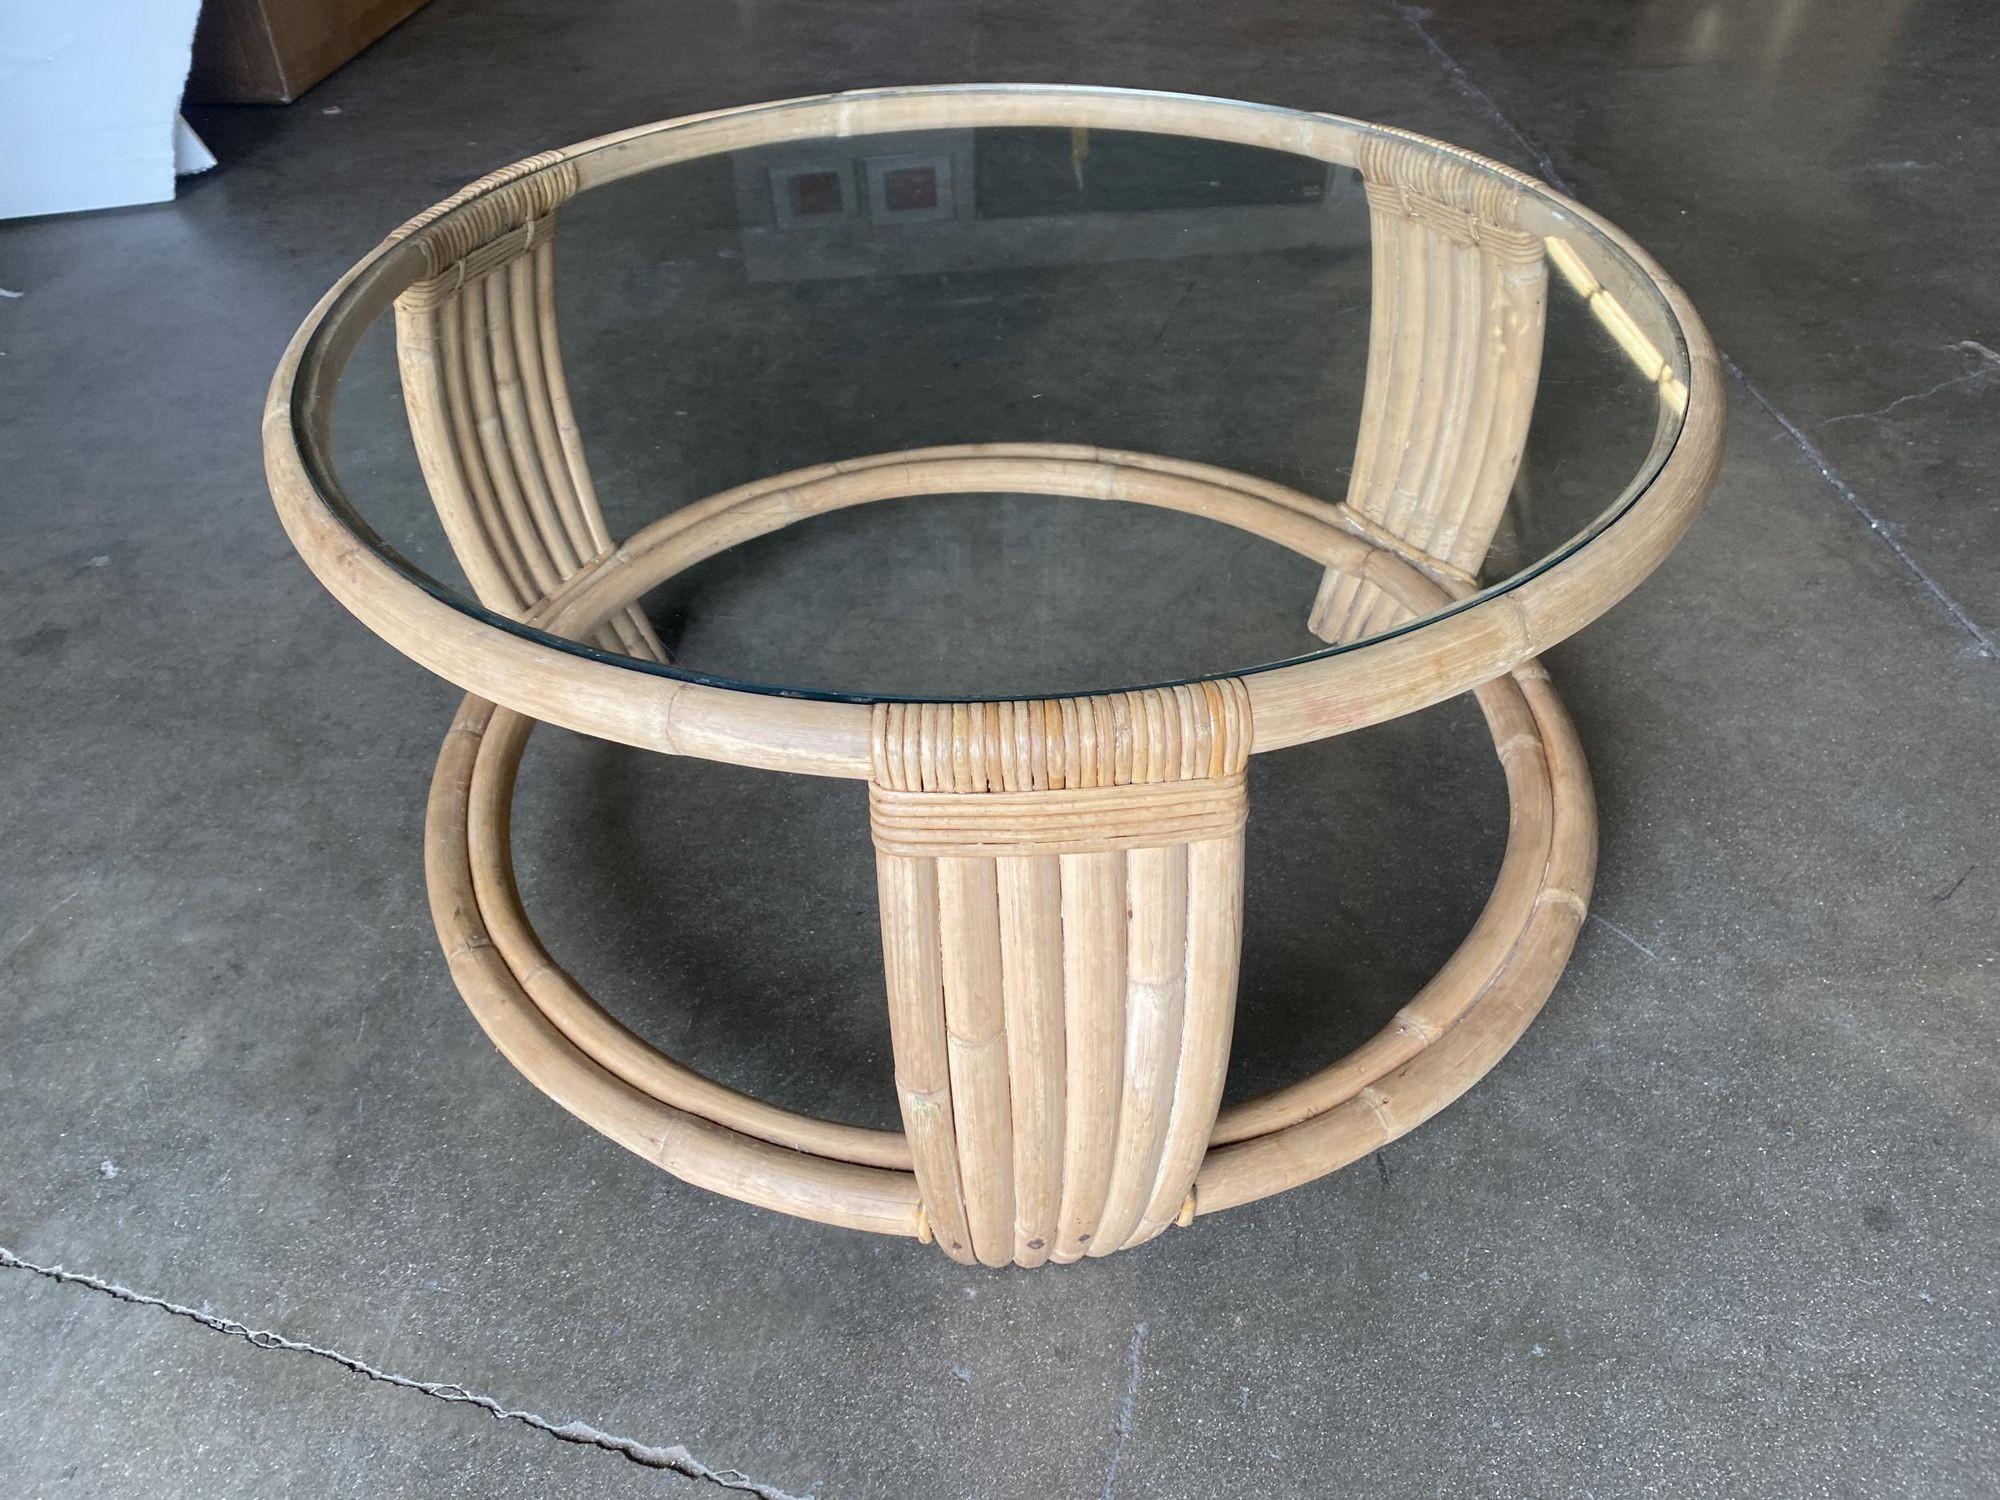 Five strand rattan coffee table, circa 1940. The unusual round base's circular form is echoed throughout the piece with an added triangular form and a small interior circle. The table also features a round glass top.

Professionally restored to